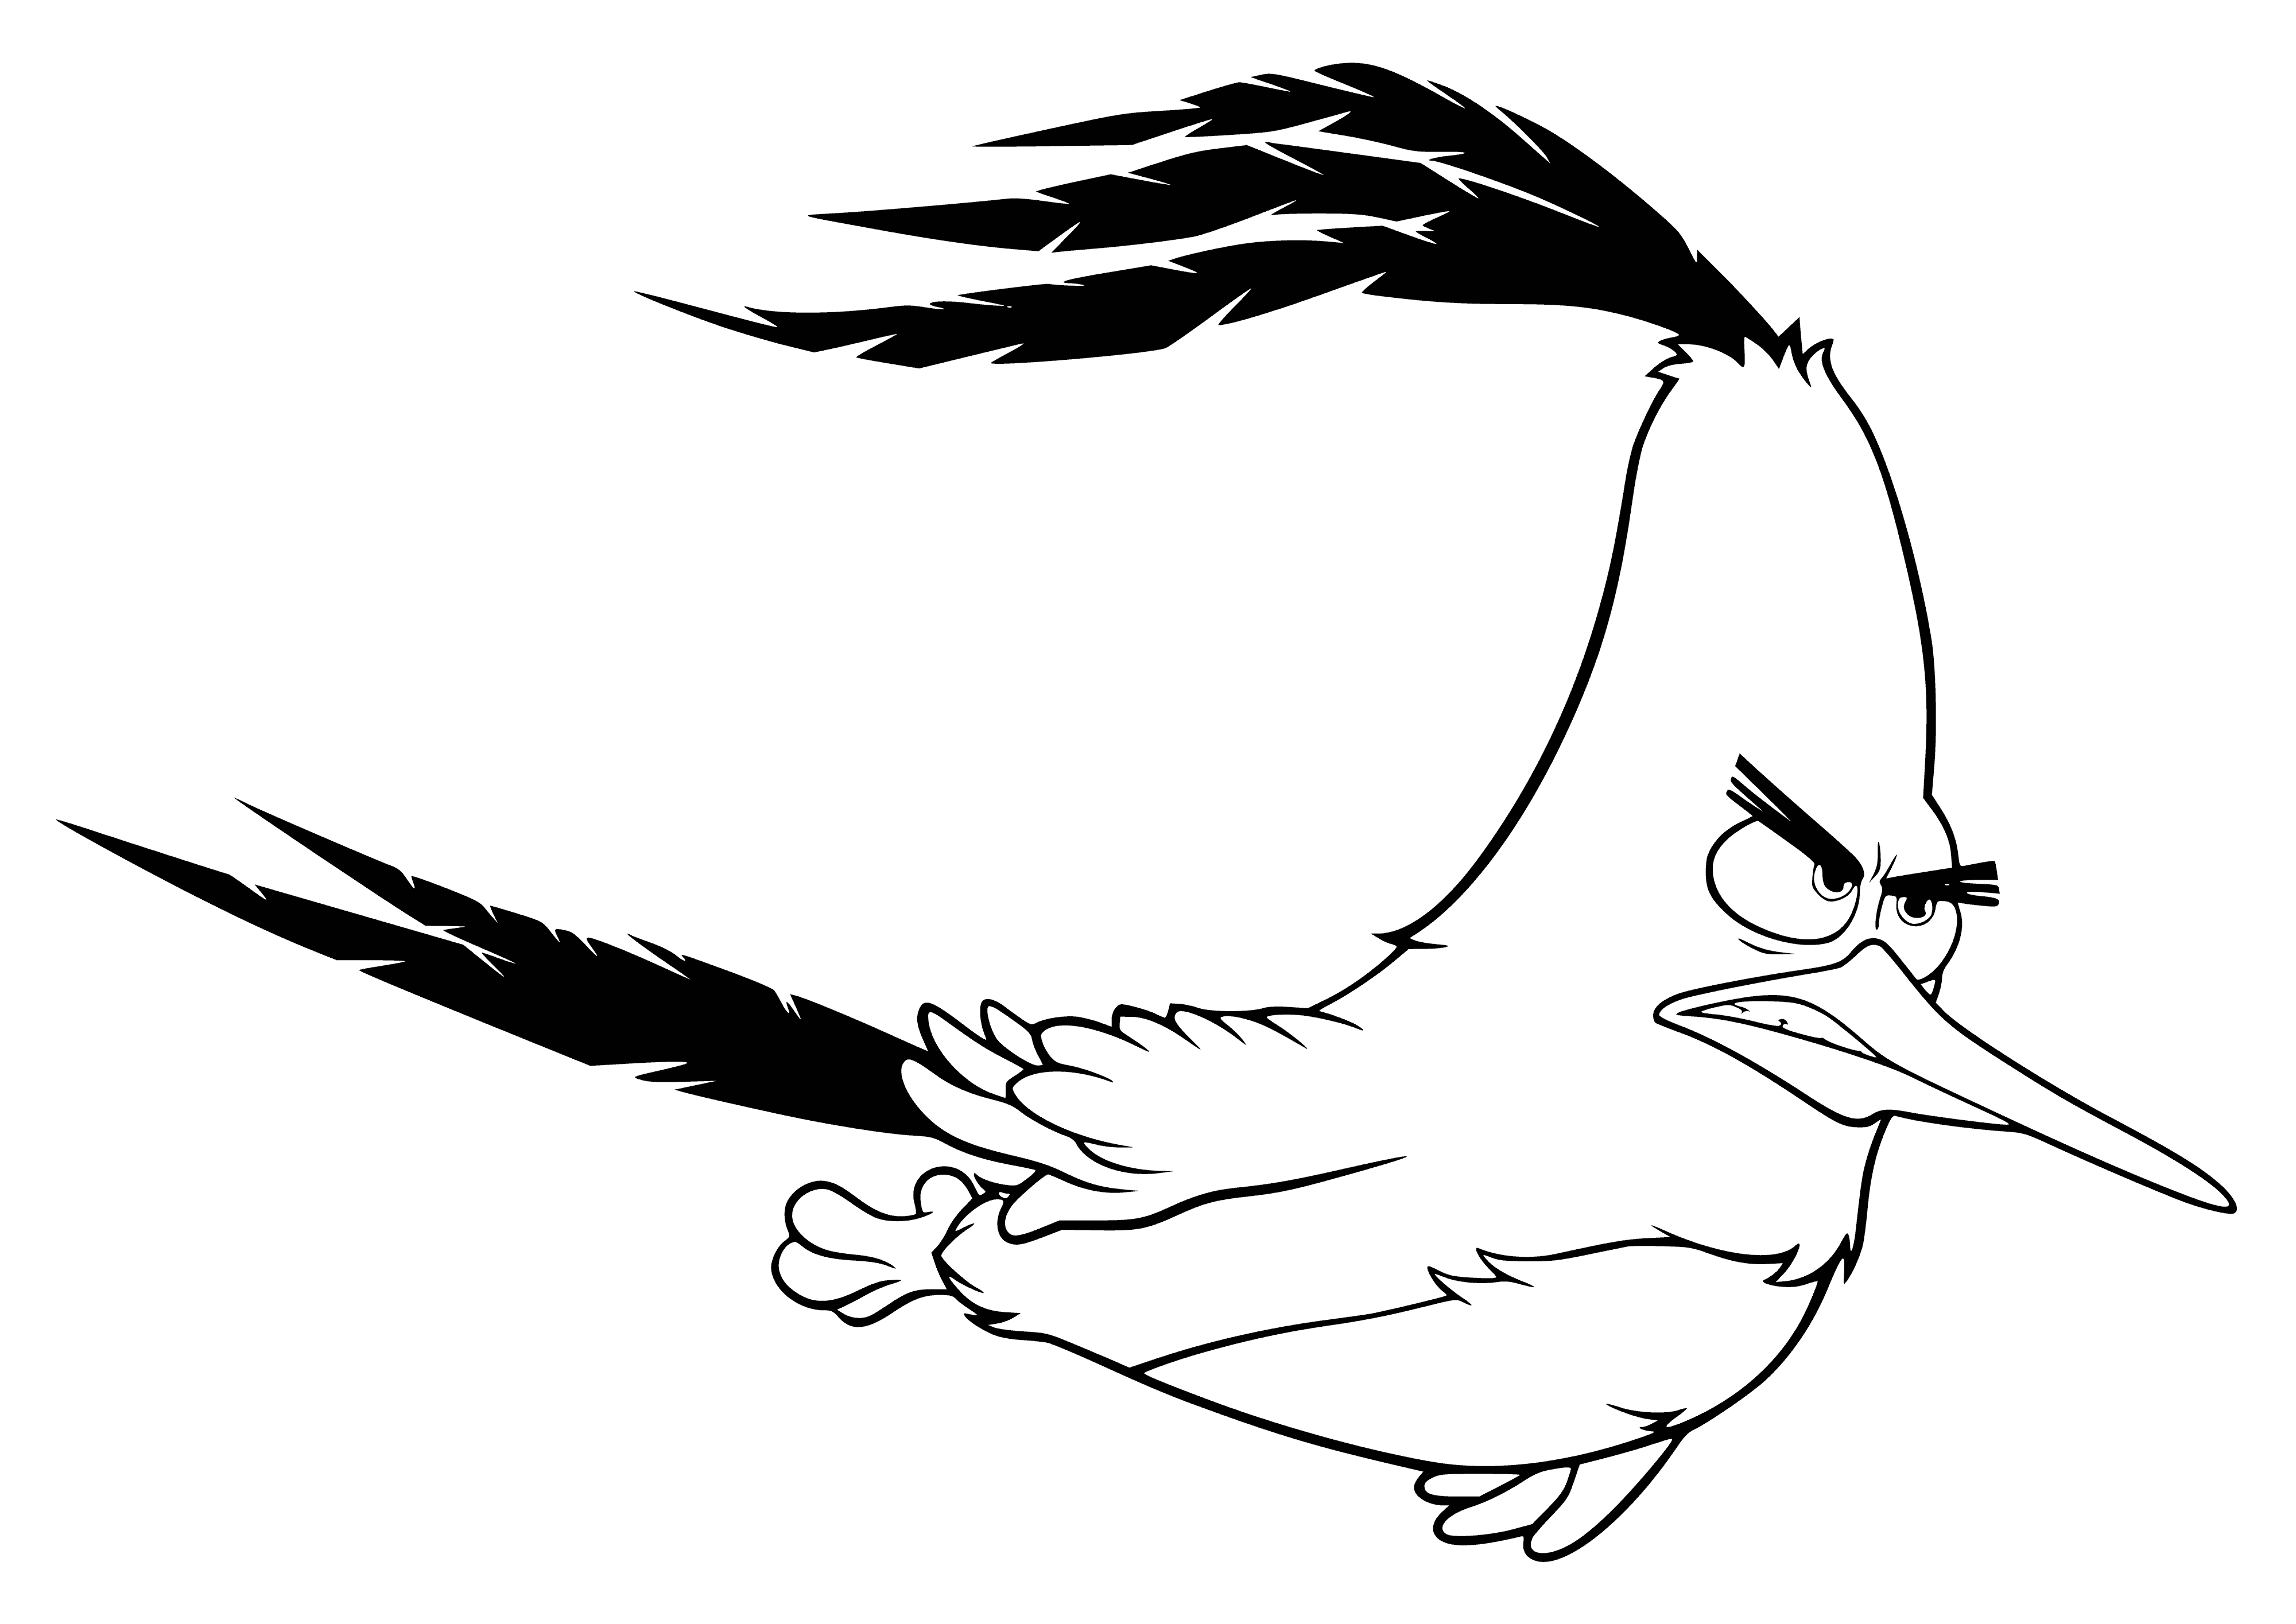 coloring page: A red bird with black eyes is flying gracefully, its wings outstretched and tail feathers streaming behind.